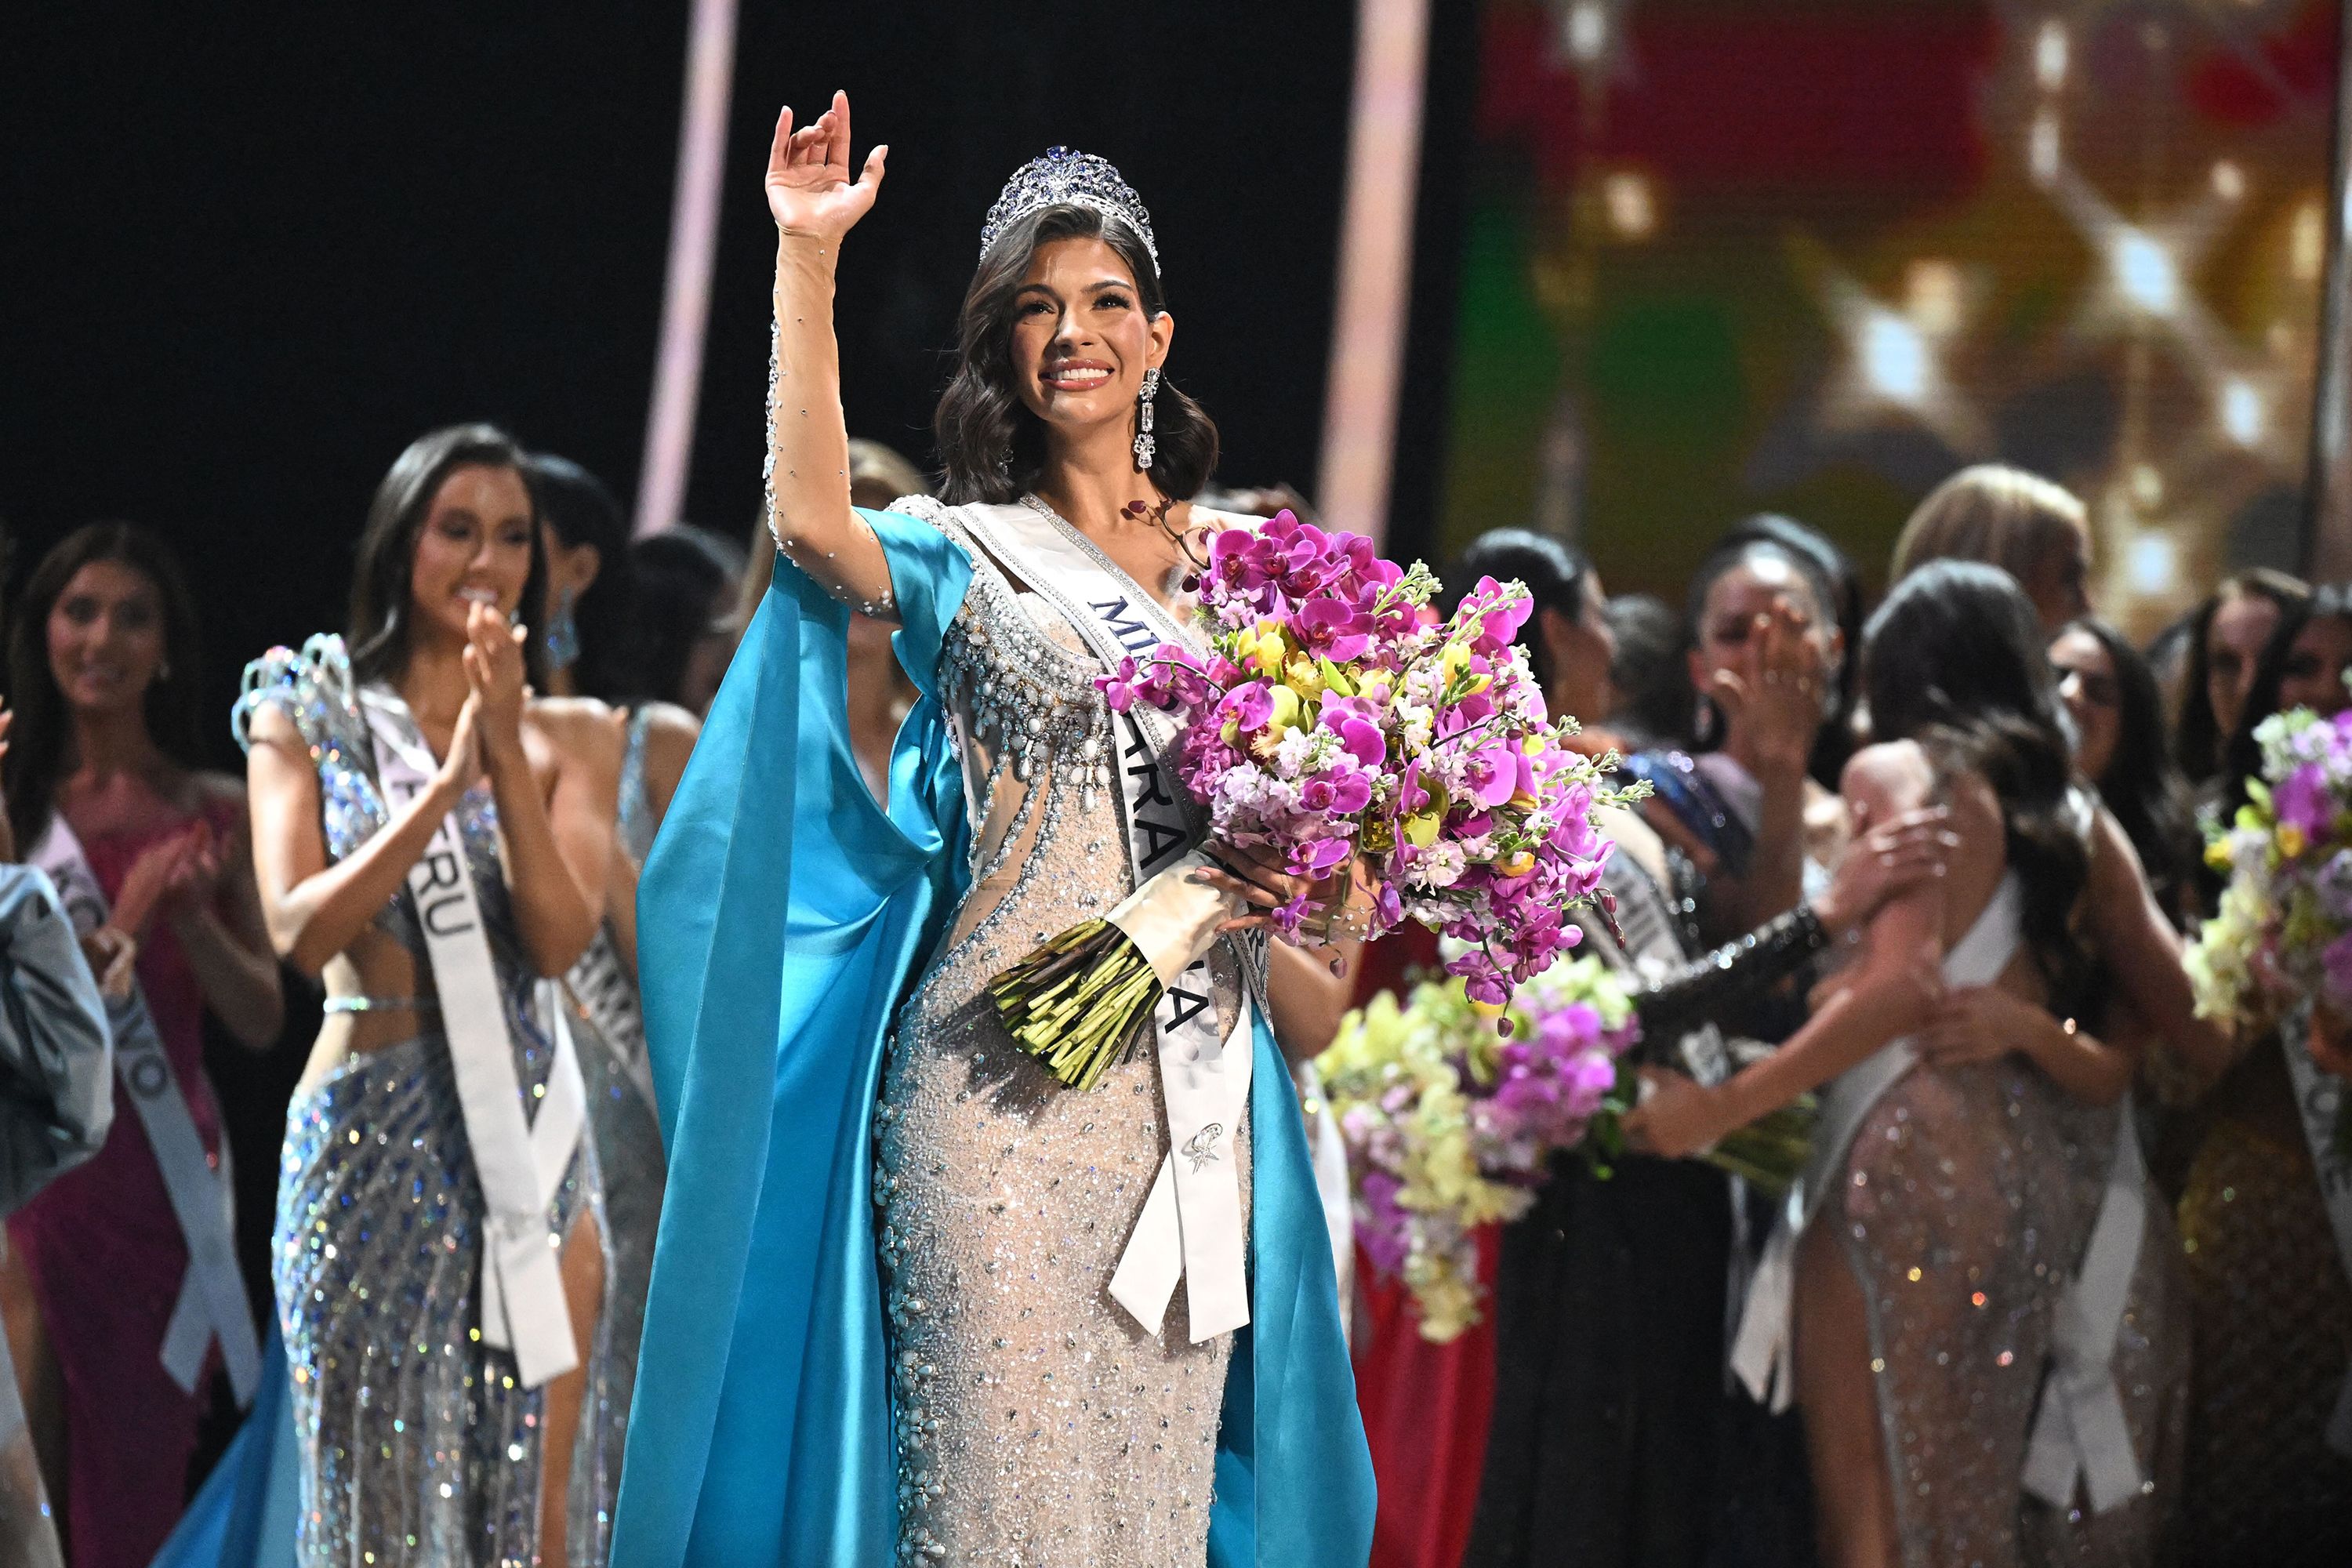 A newly-crowned Palacios waves to the audience in attendance at the Miss Universe pageant final.